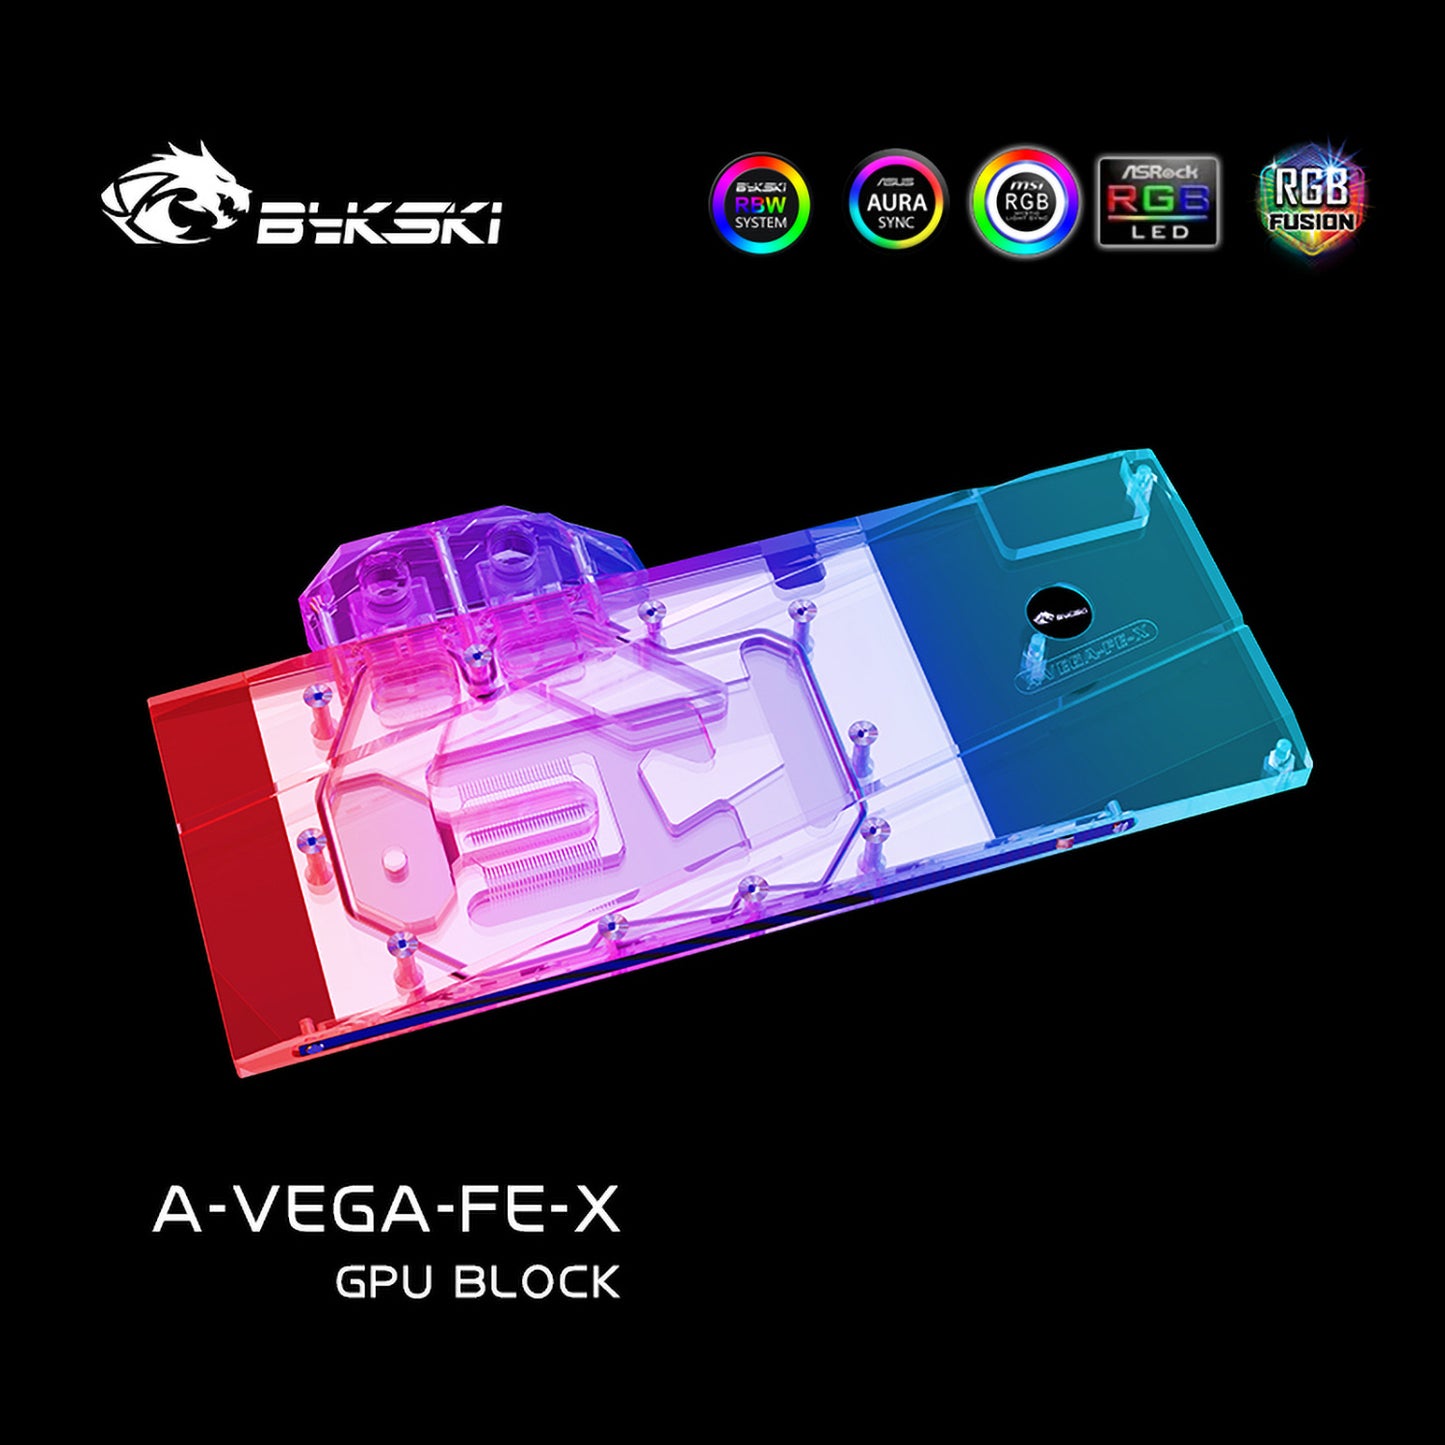 Bykski GPU Water Block For AMD RX VEGA 64 / 56 Founder Edition, Sapphire Dataland XFX Yeston VEGA, Full Cover With Backplate PC Water Cooling Cooler, A-VEGA-FE-X